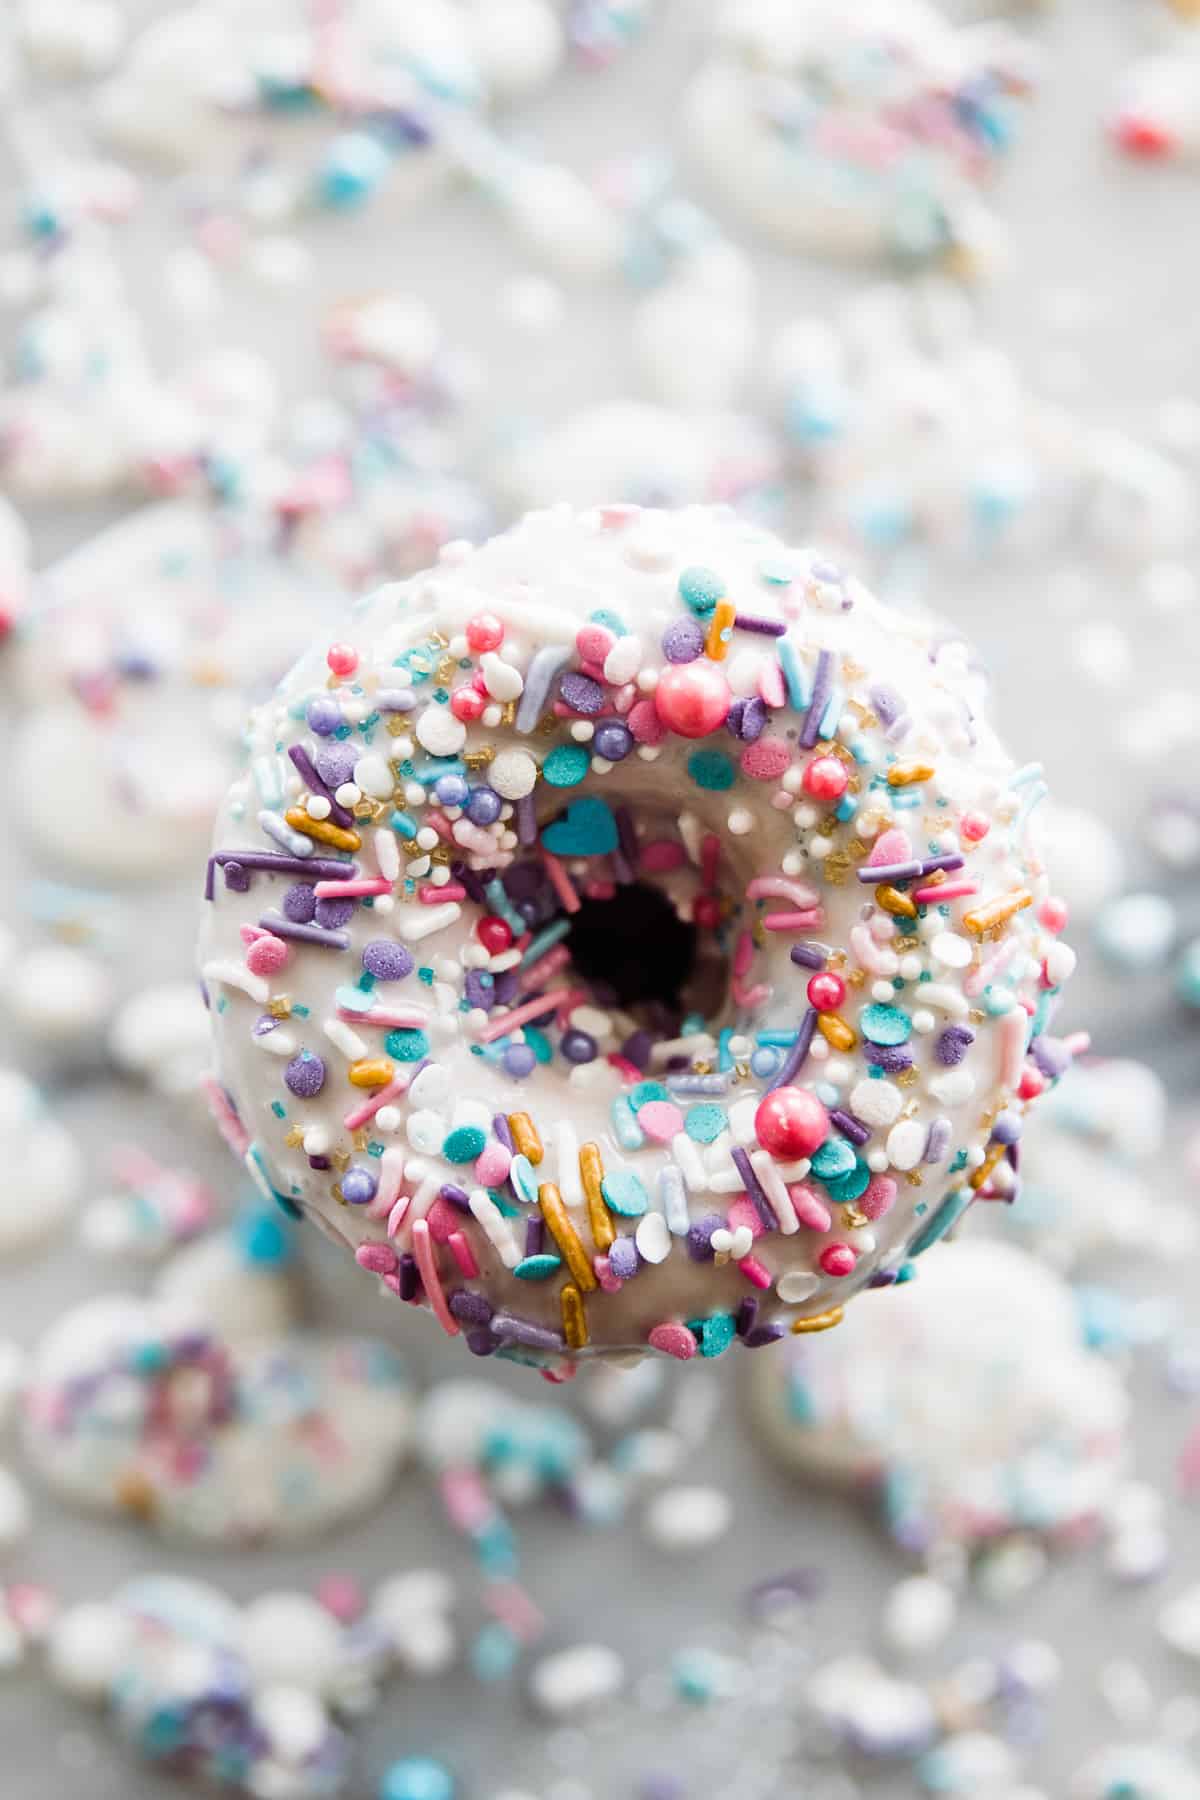 One frosted baked donut with sprinkles